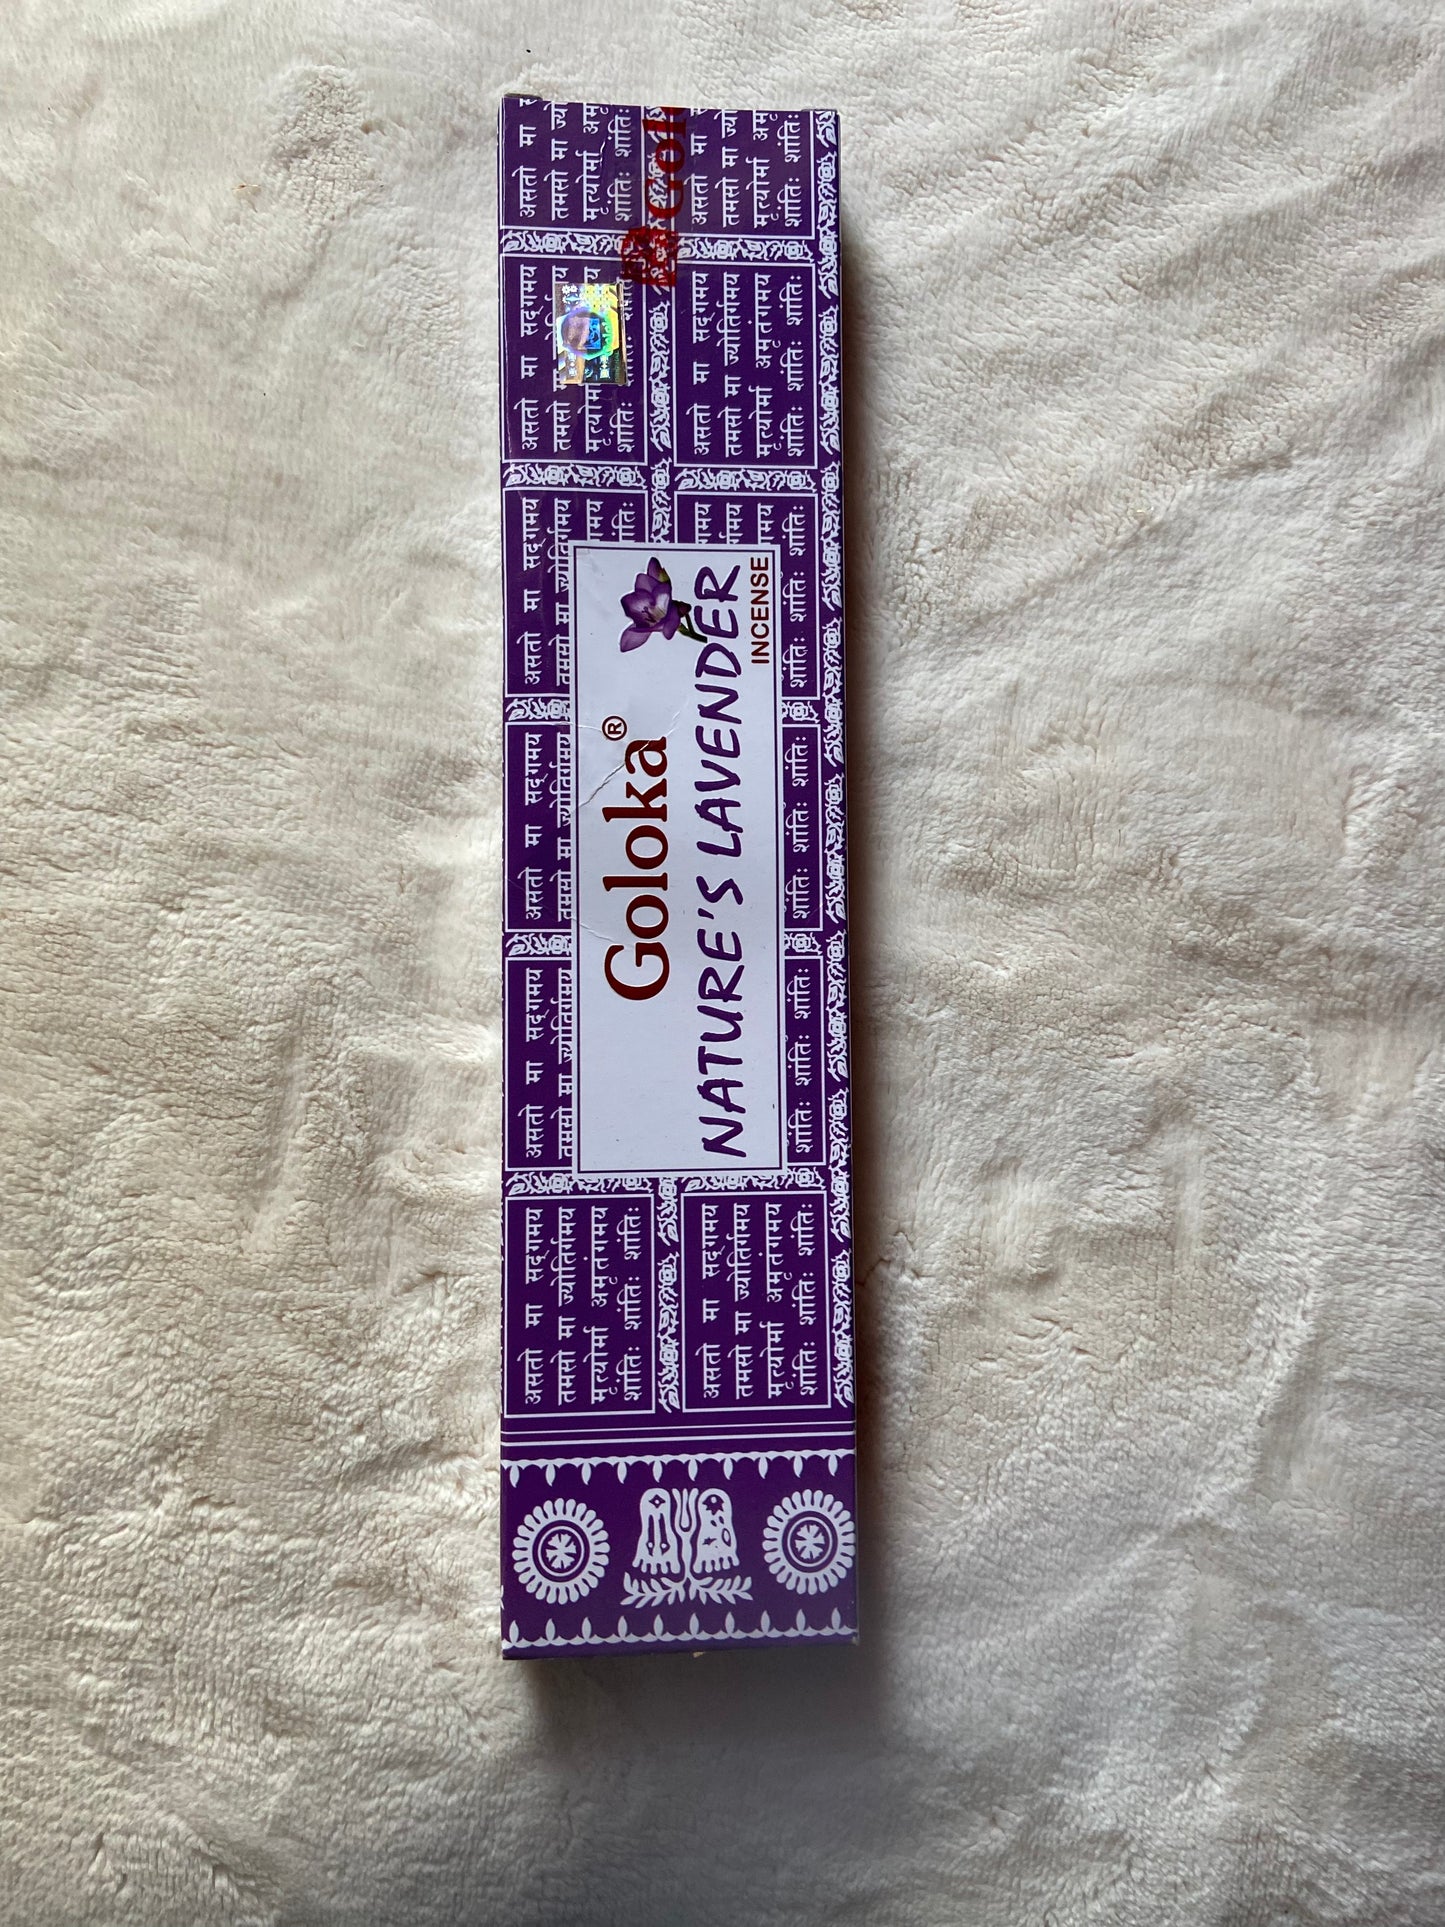  Lavender Incense Sticks -  available at Amazing Creations Products . Grab yours for $4.99 today!